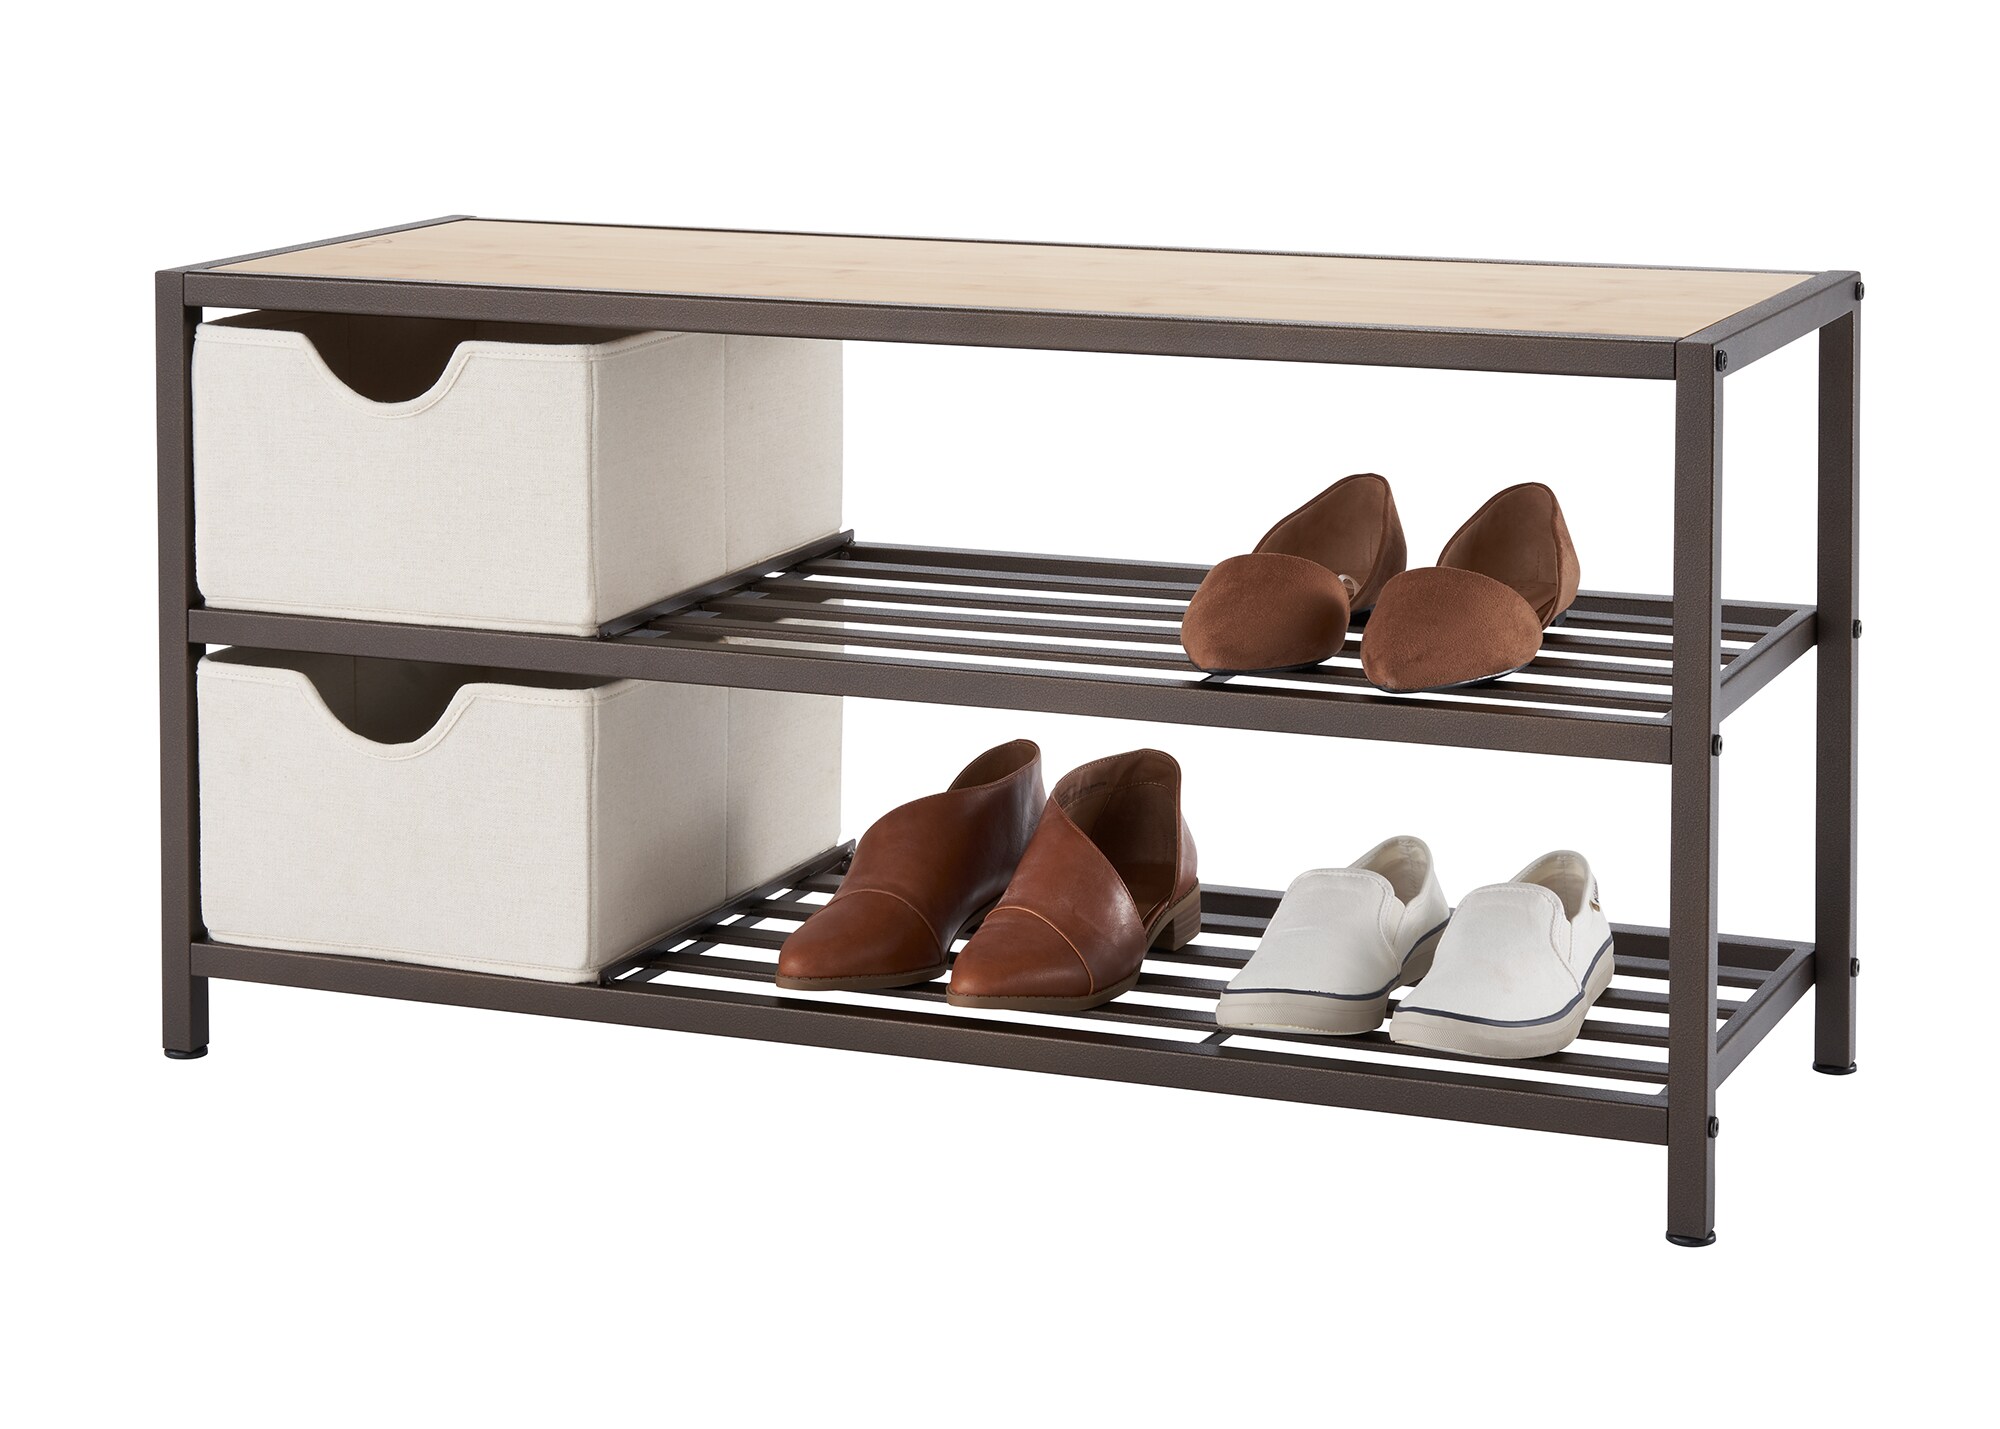 10 Tiers Shoe Rack Large Shoes Rack Organizer 9 Plaid for 27 Pairs